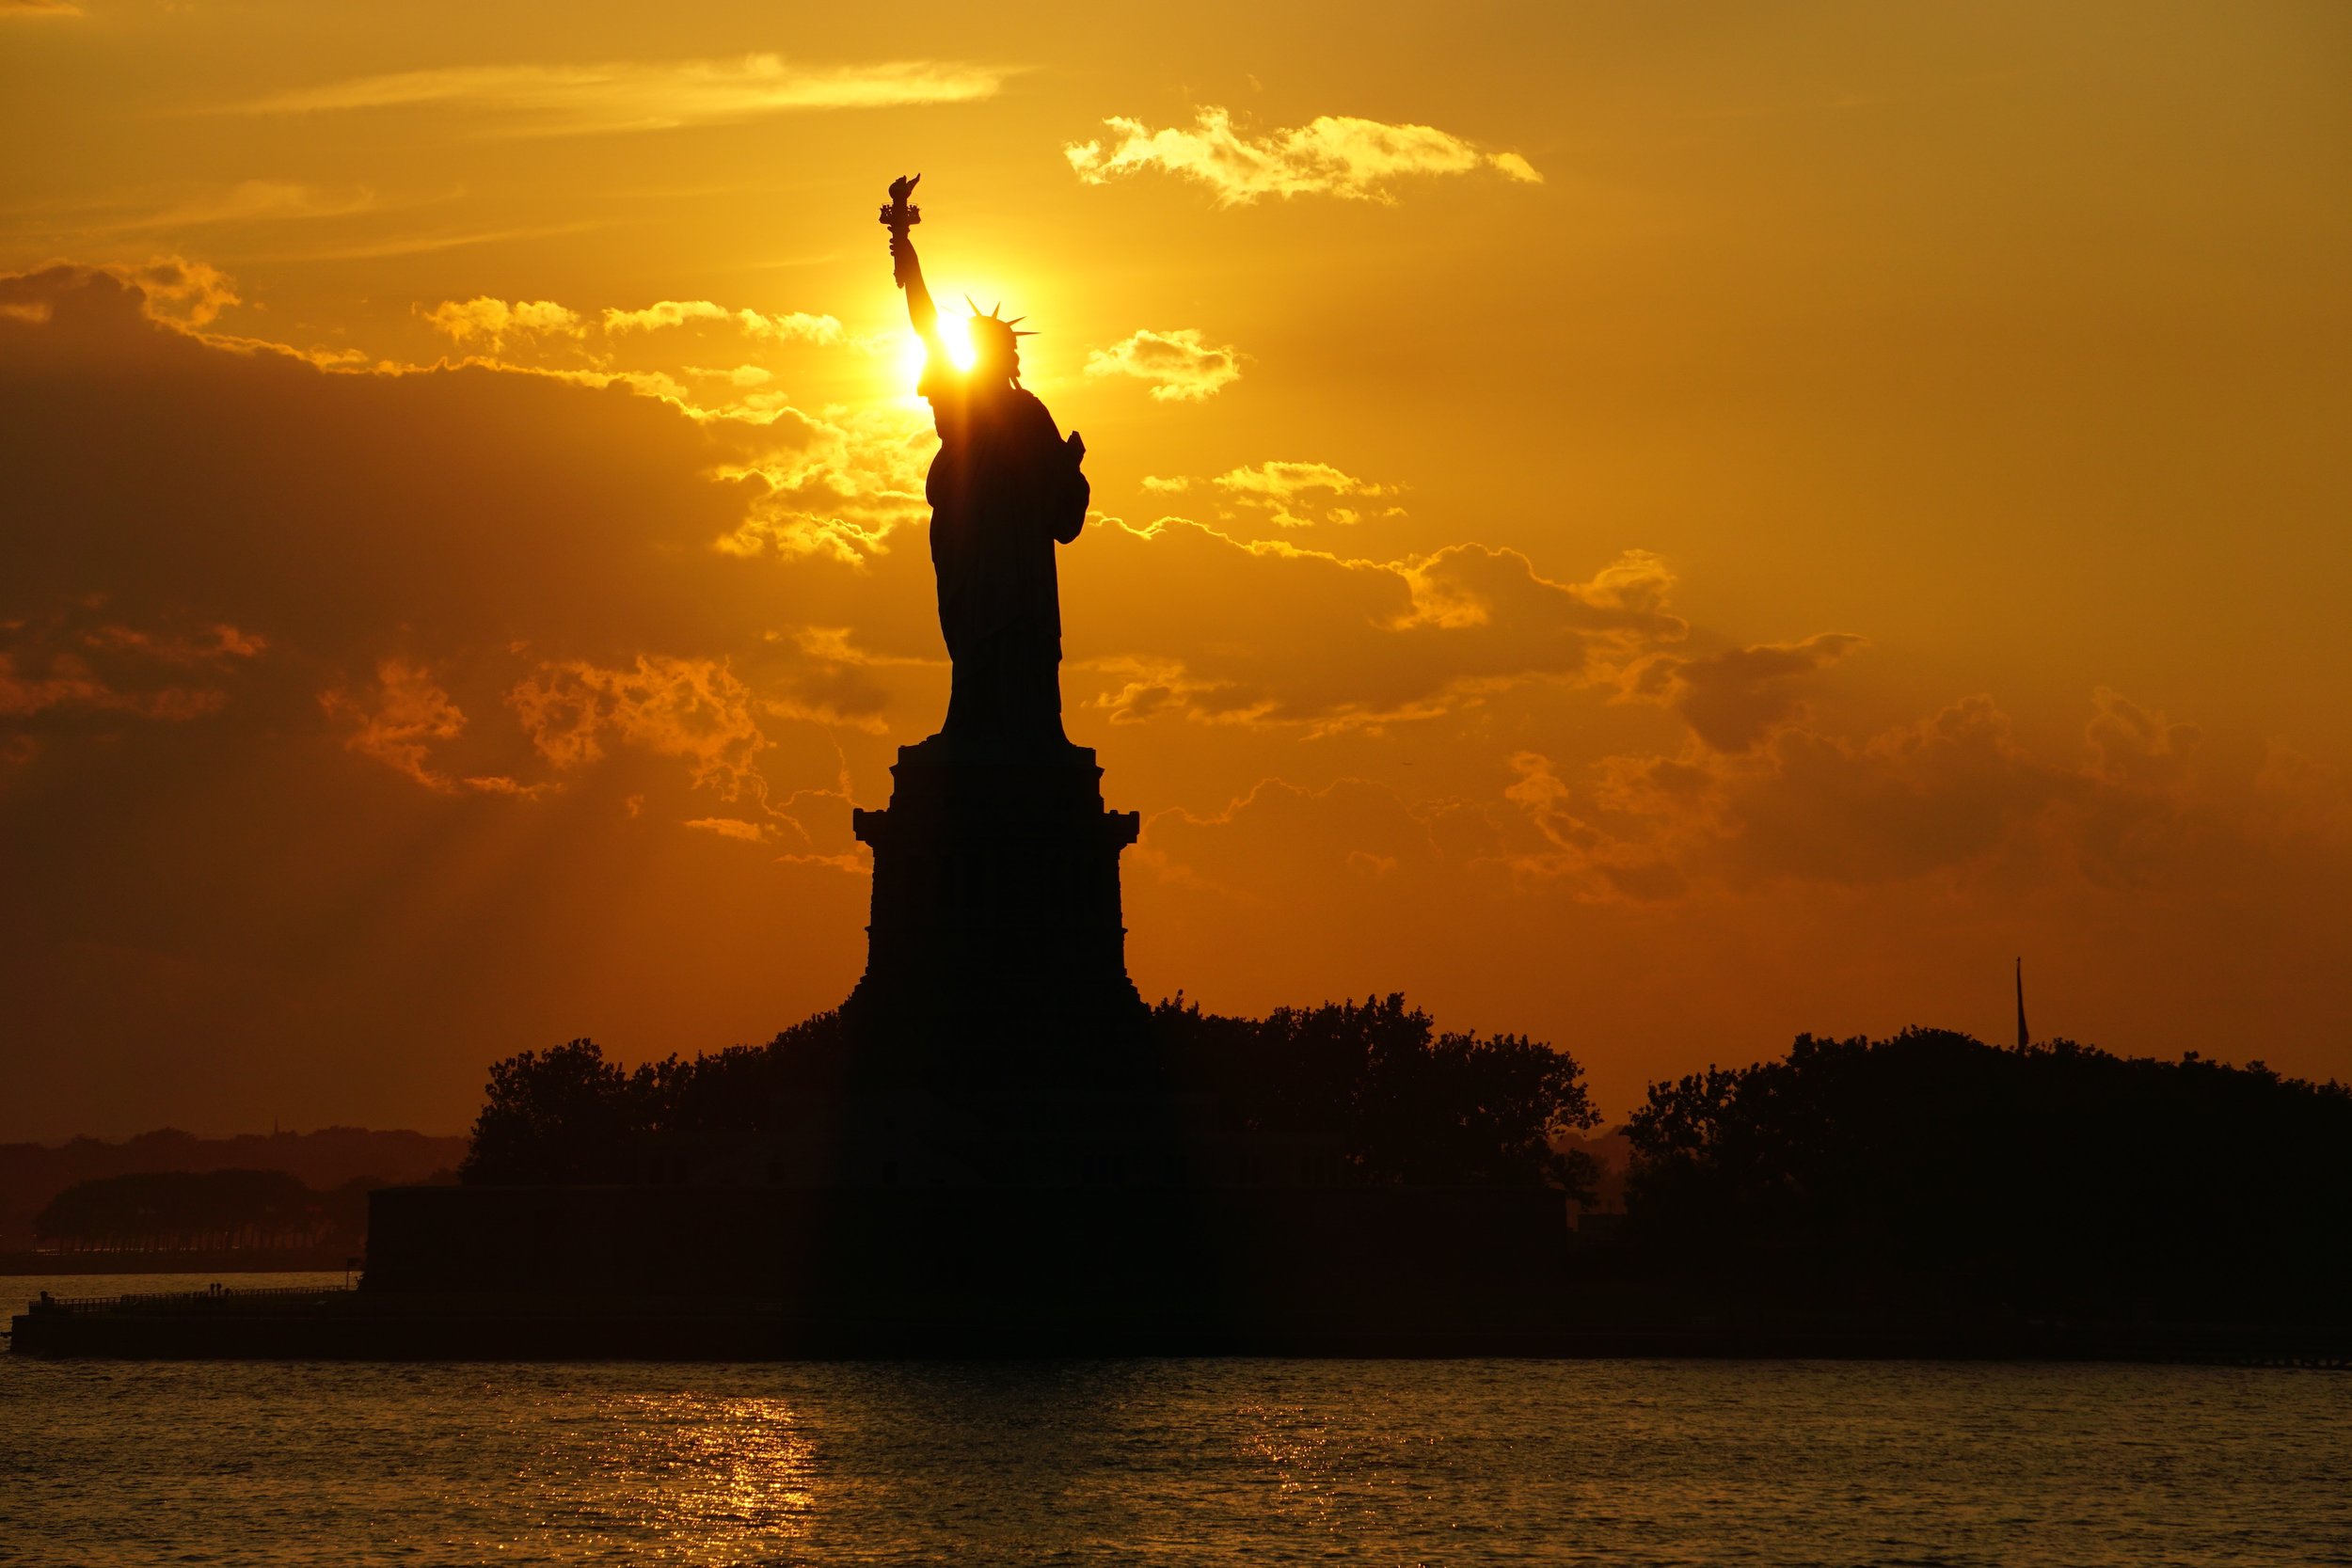 Sunset at The Statue of Liberty